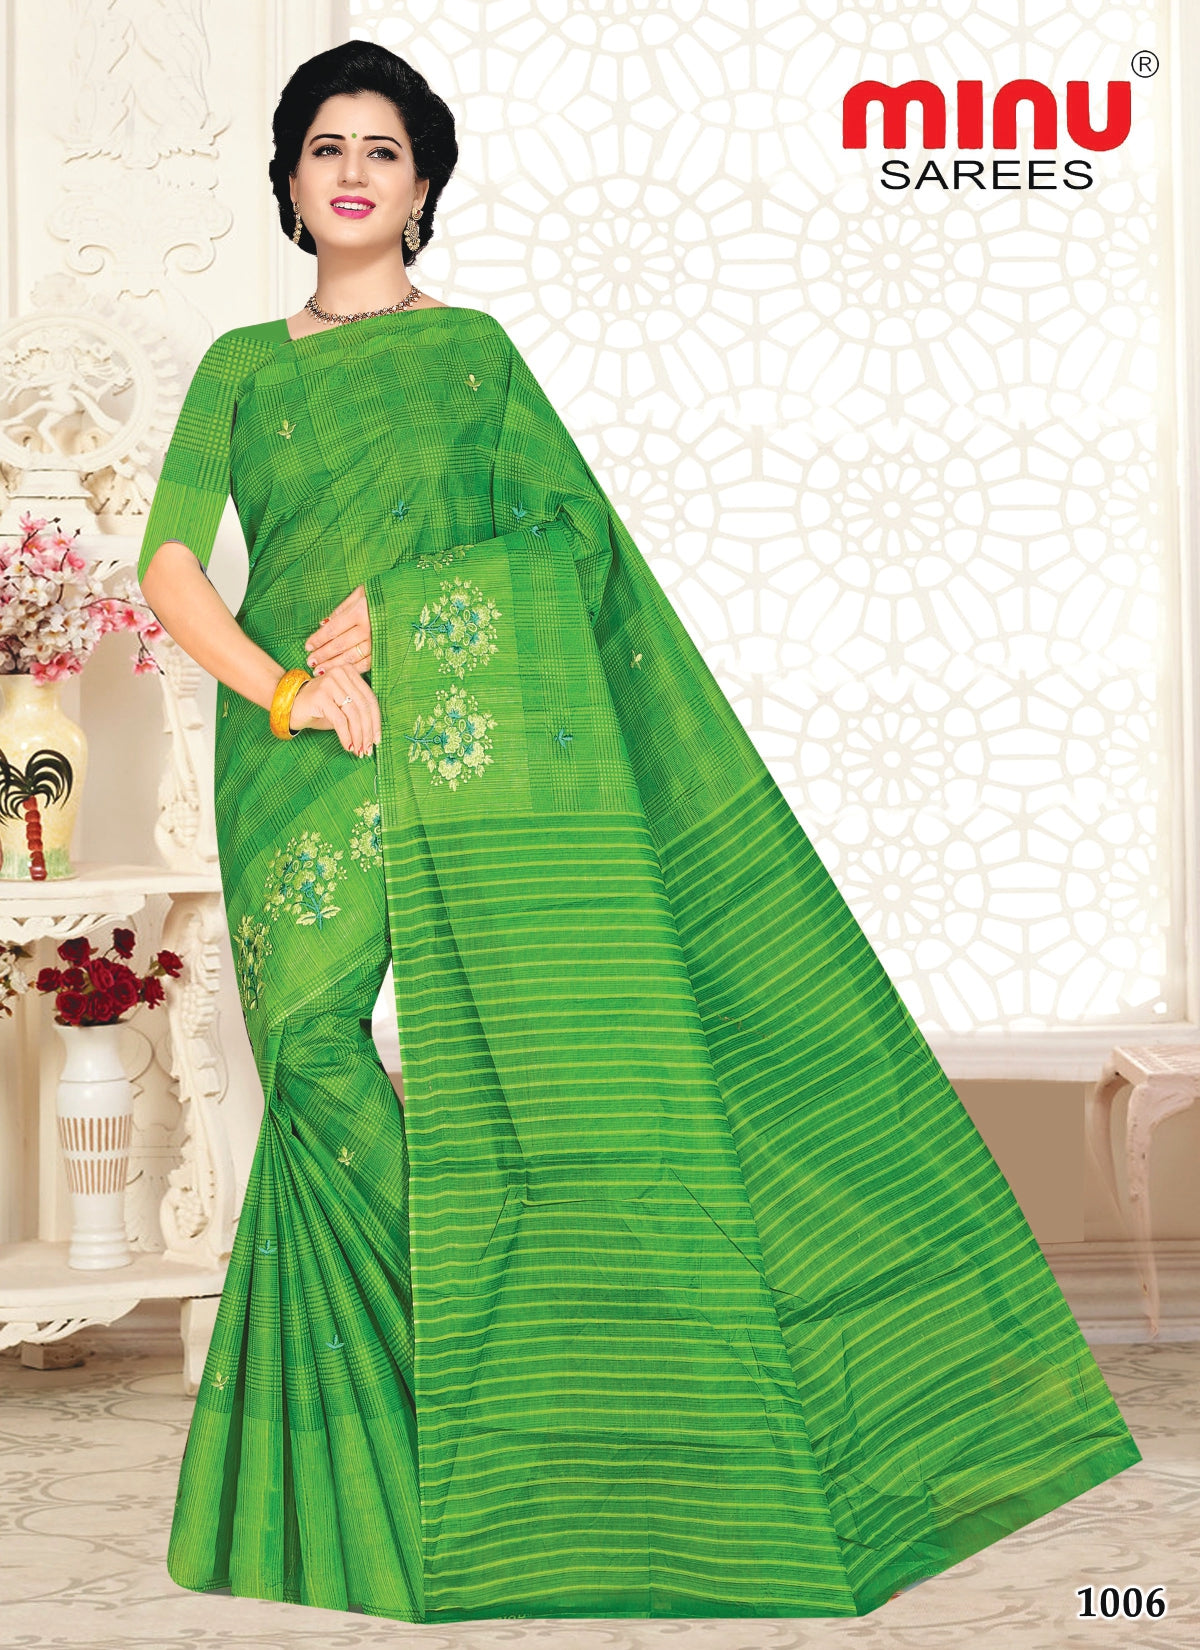 Green saree Durga puja special online for sale